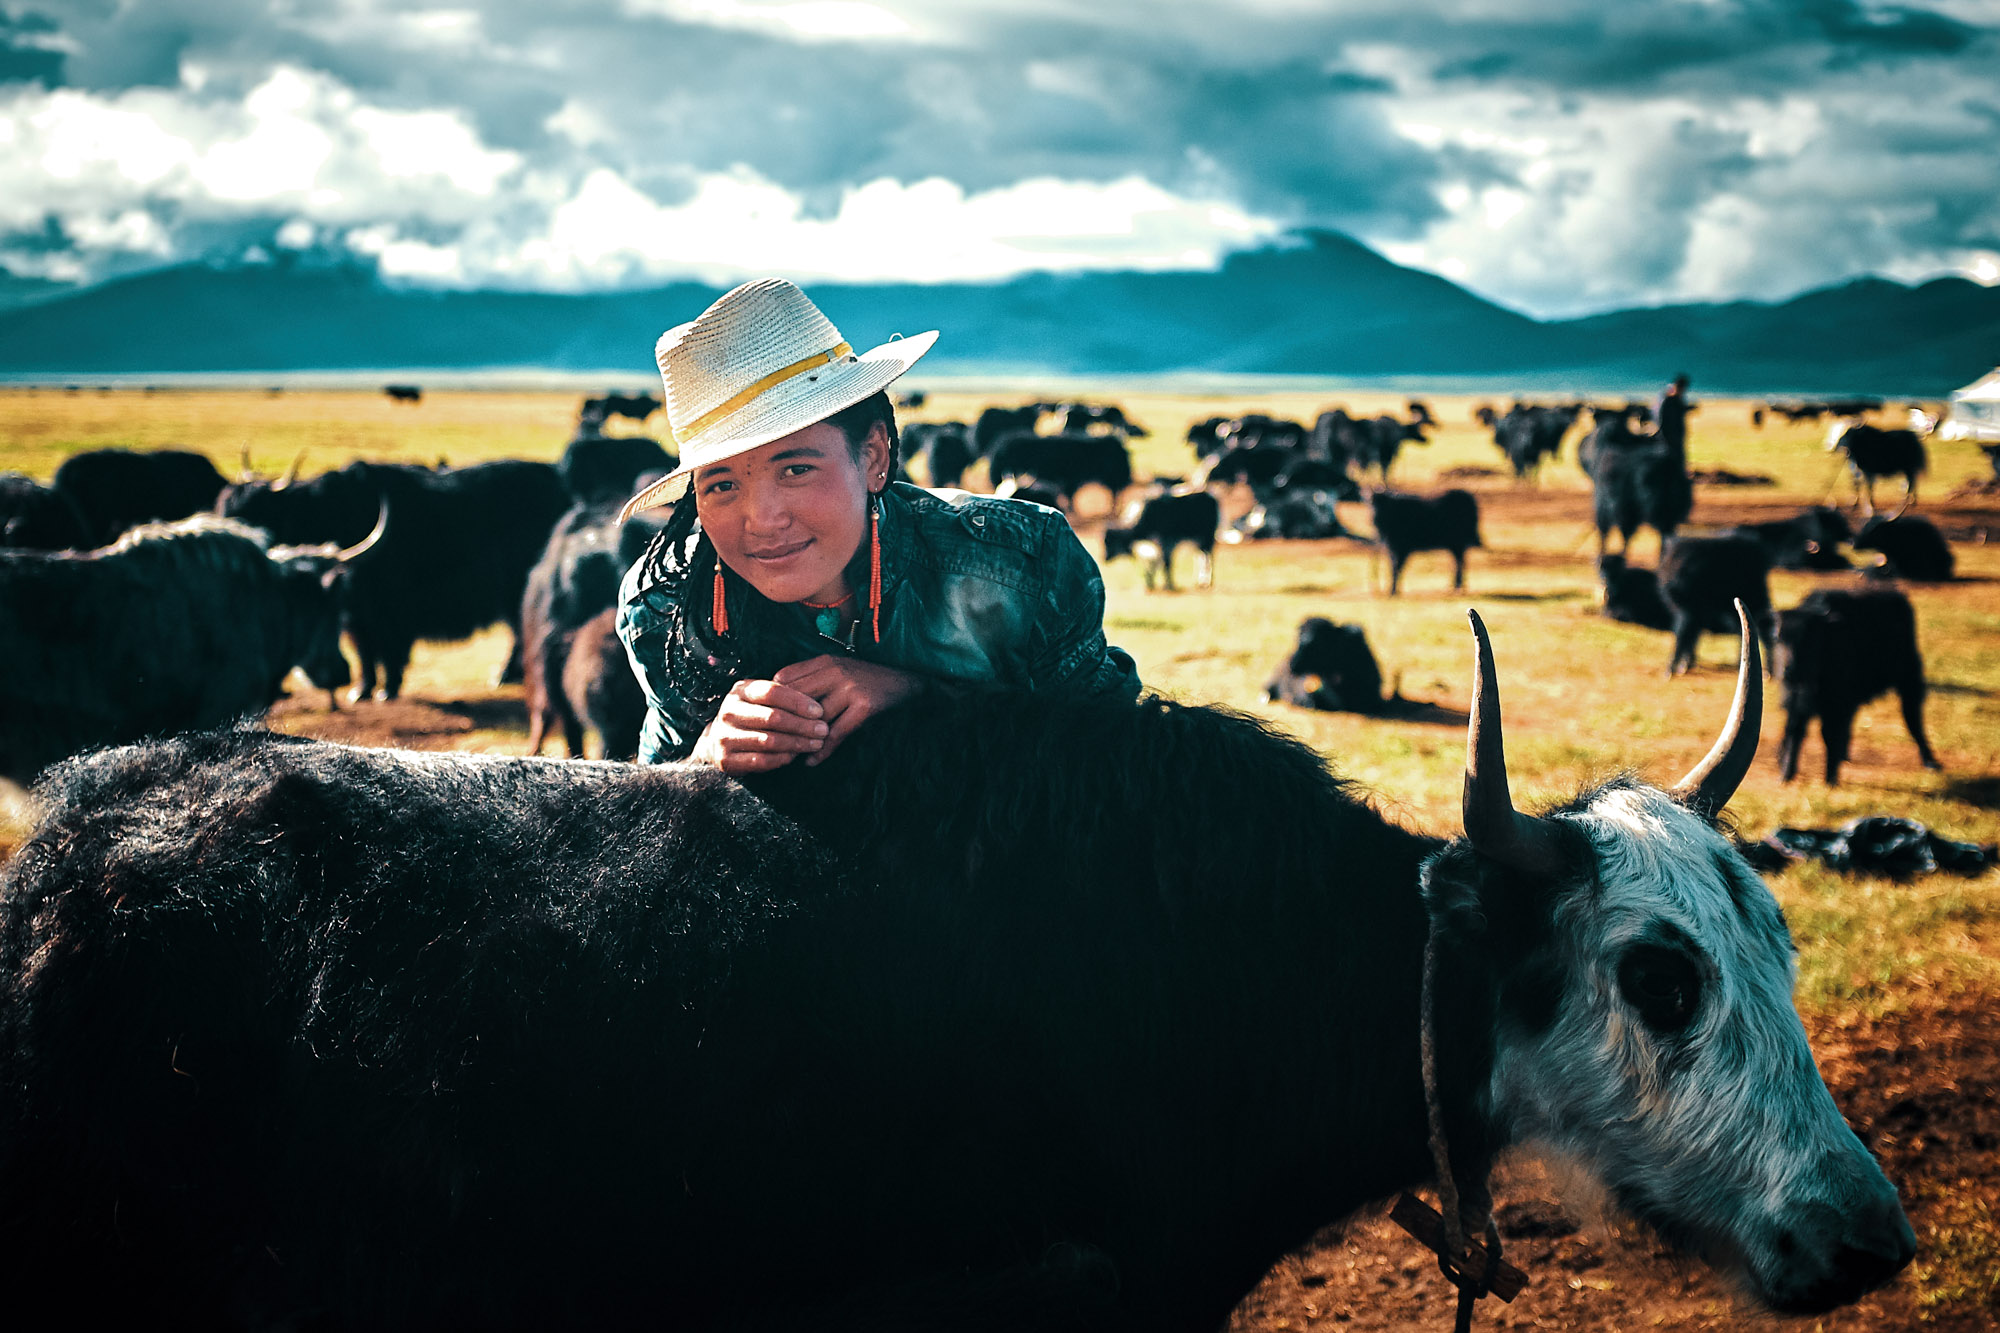 Interview with Pavel Dvorak, Yunnan Expert and Professional Photographer